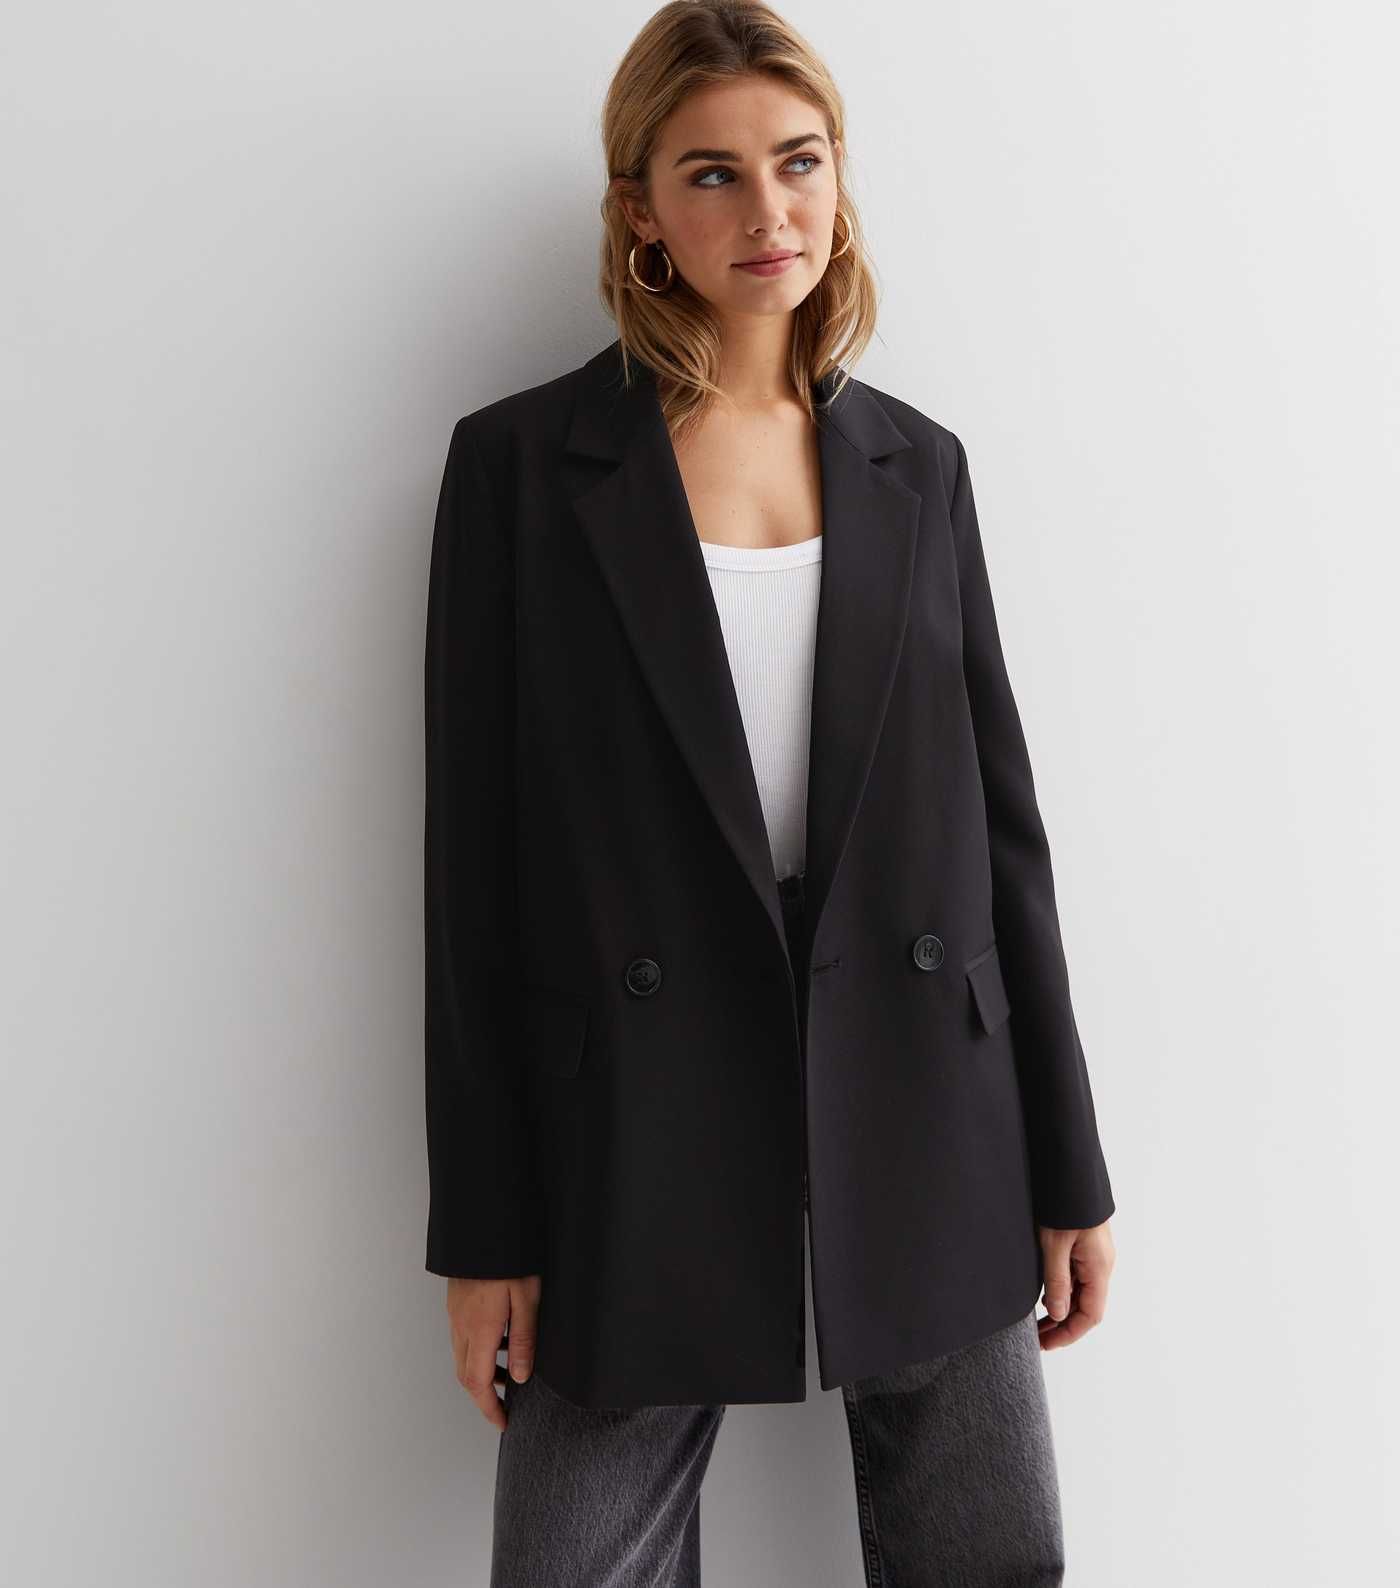 Black Double Breasted Oversized Blazer
						
						Add to Saved Items
						Remove from Saved It... | New Look (UK)